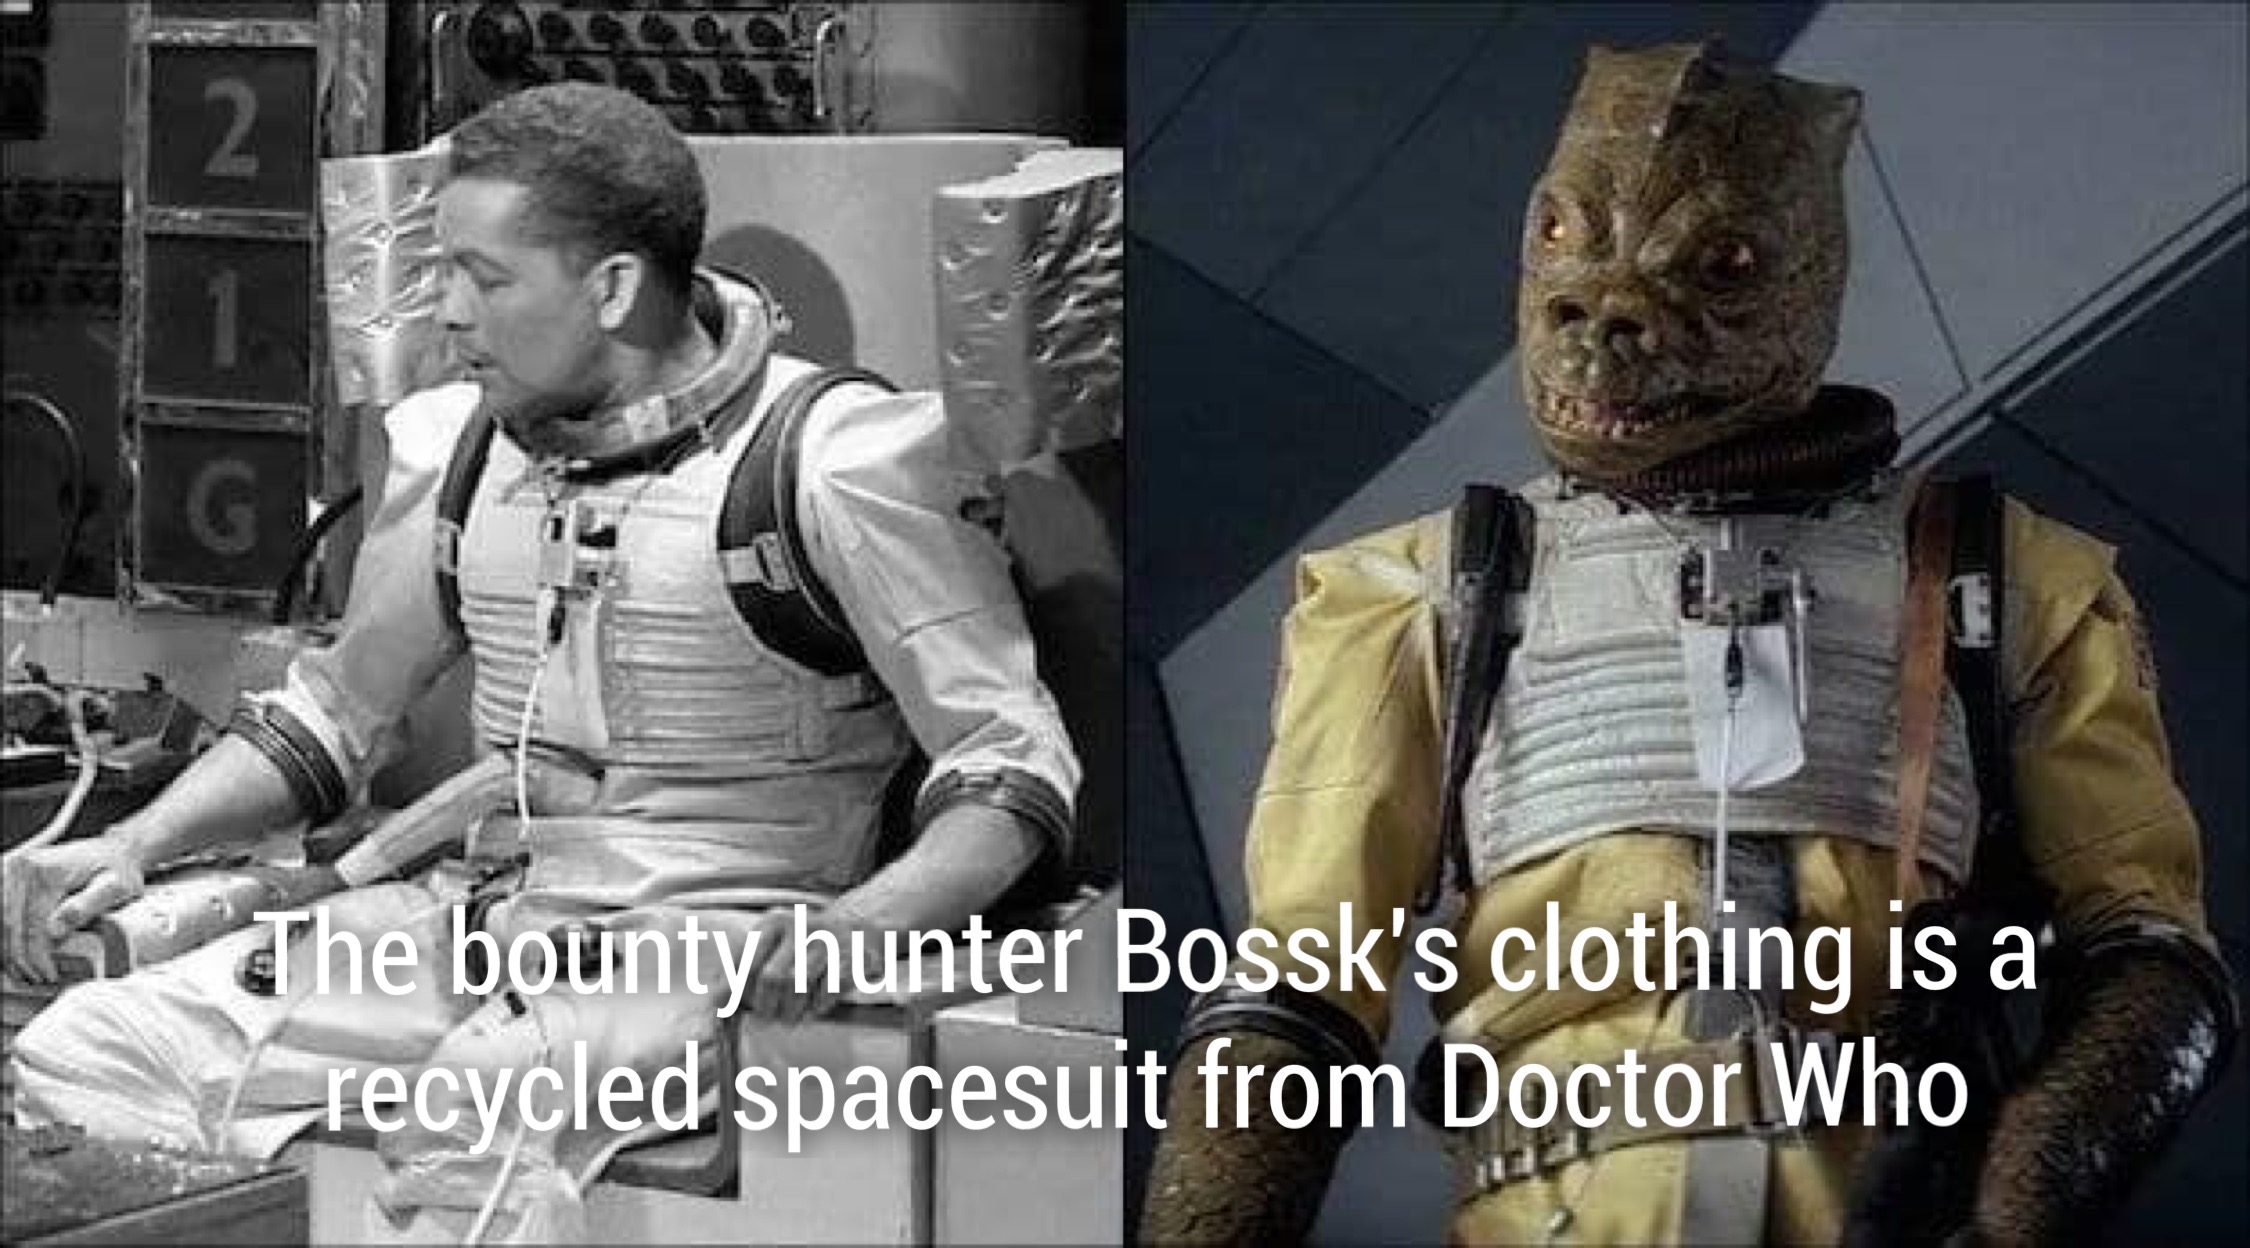 doctor who episode the tenth planet - The bounty hunter Bossk's clothing is a recycled spacesuit from Doctor Who